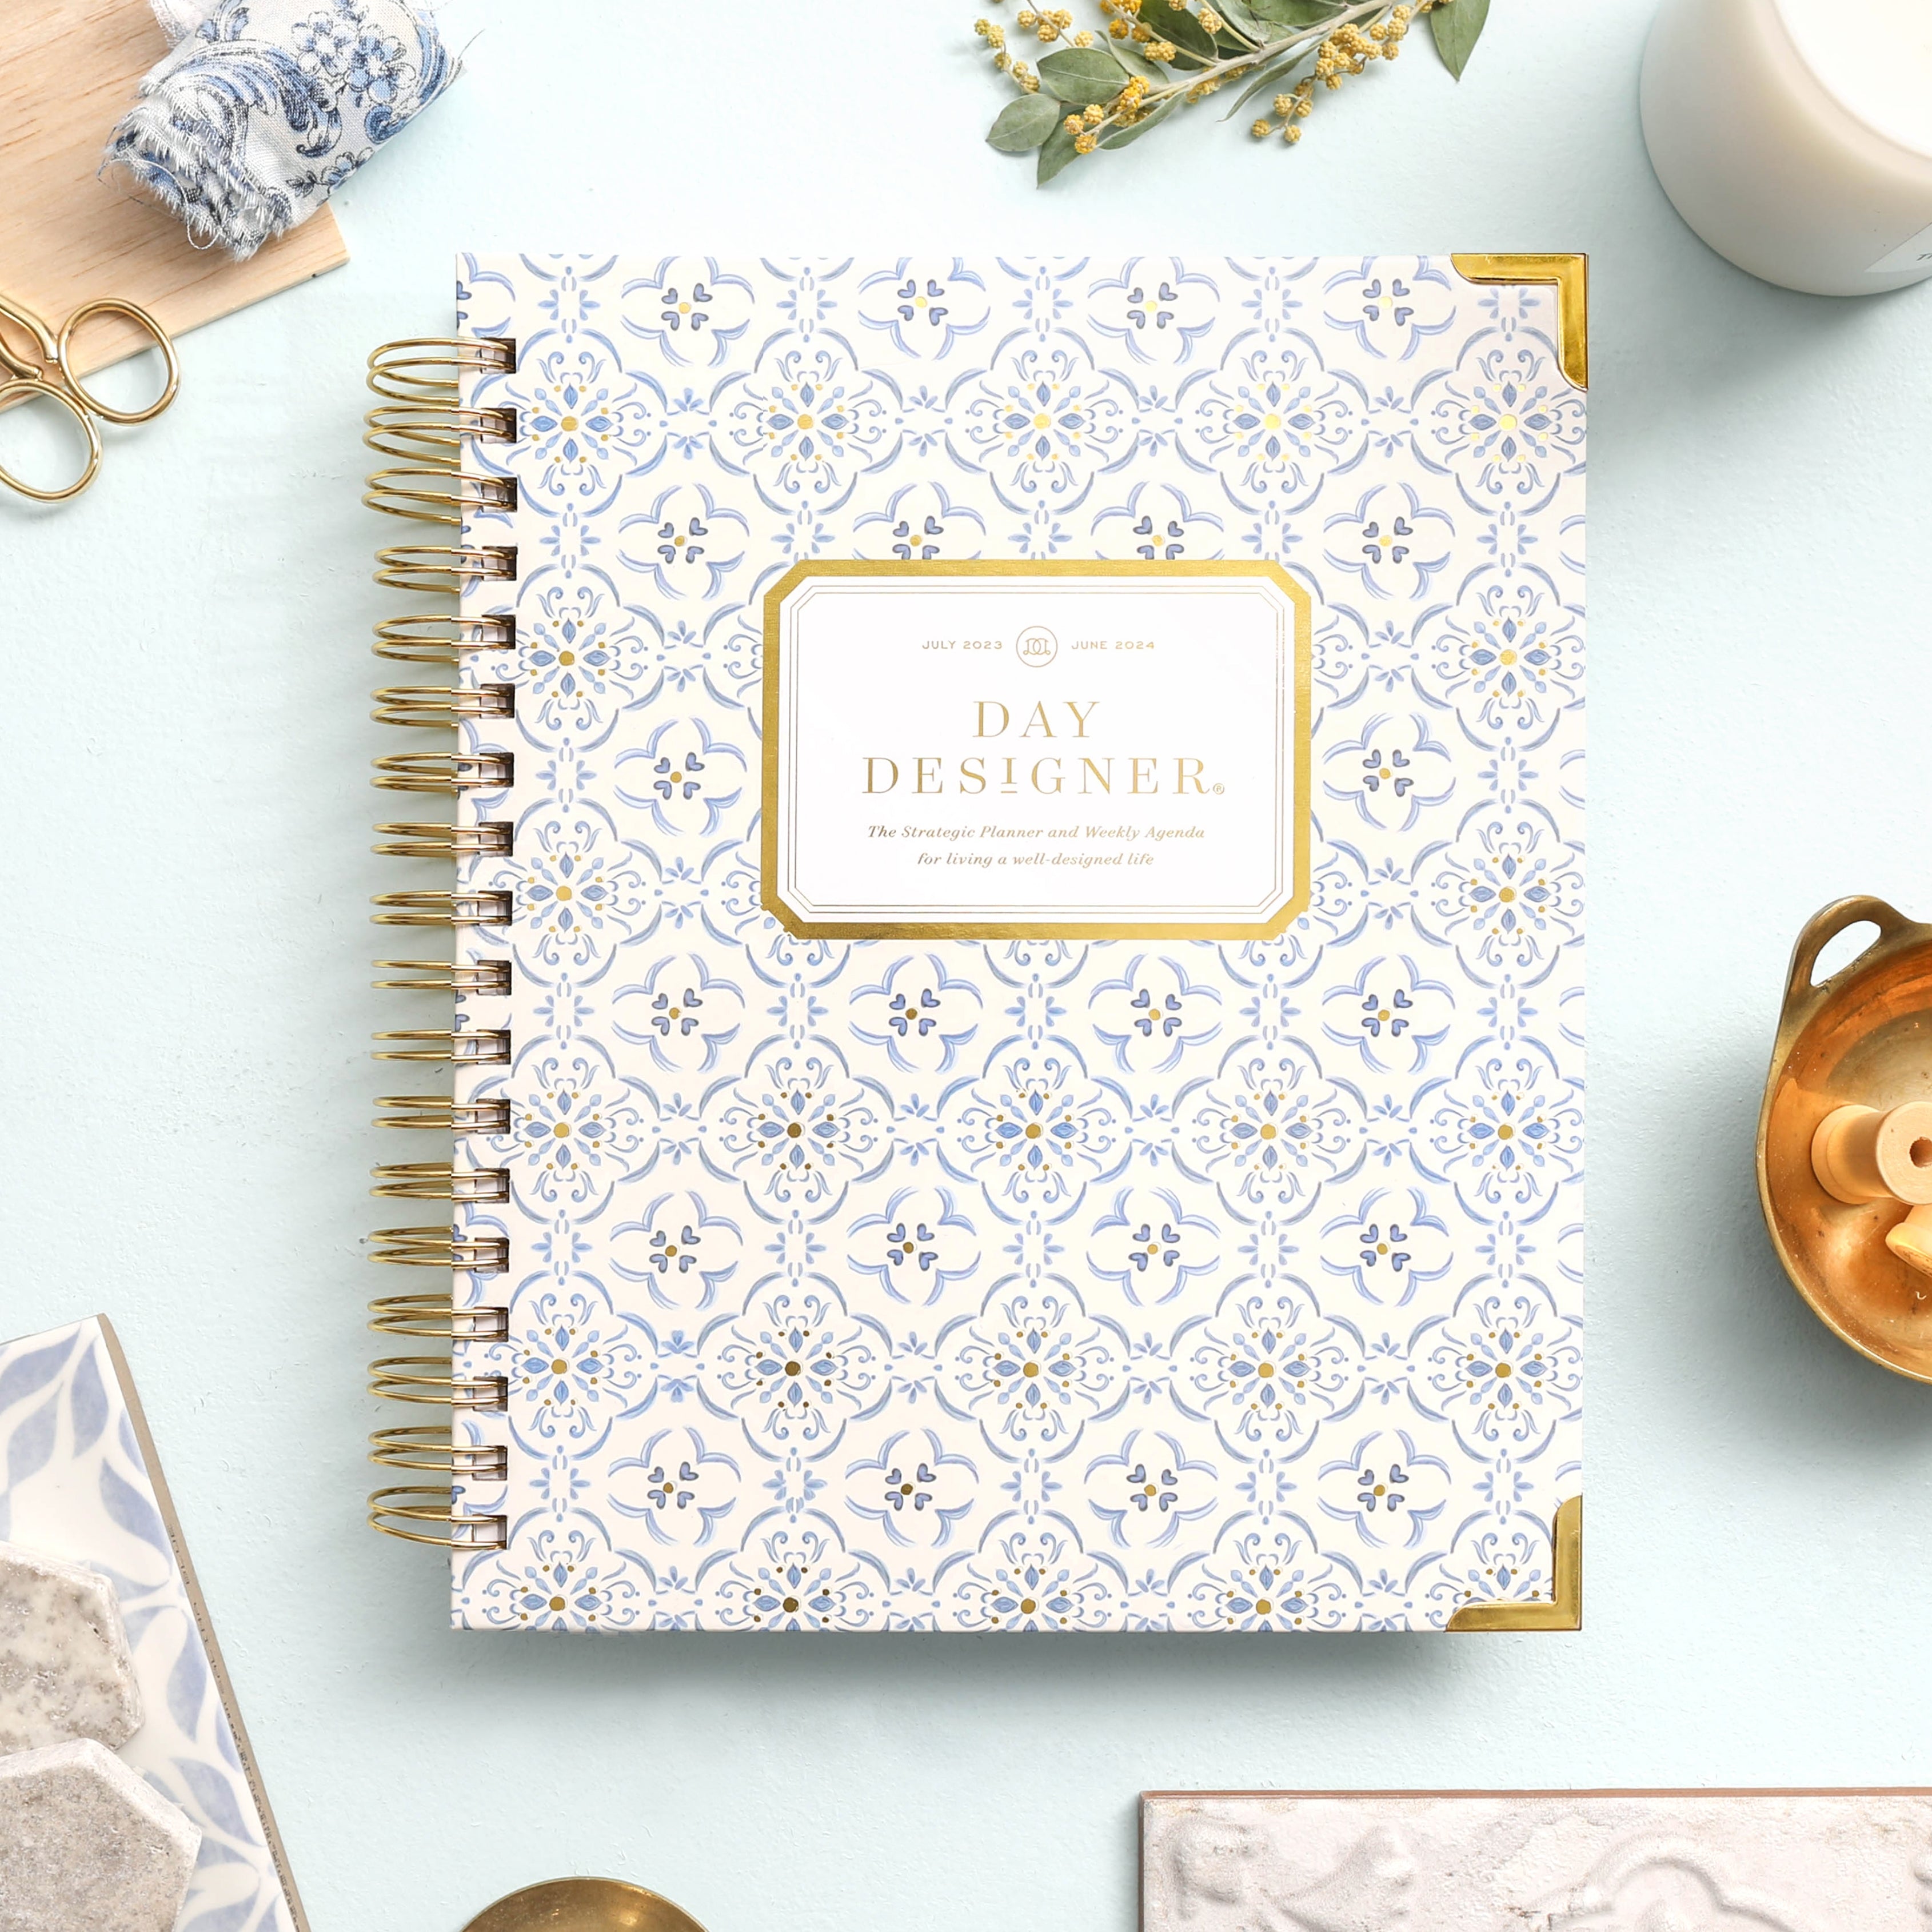 Planner Covers, Agenda & Planner Covers